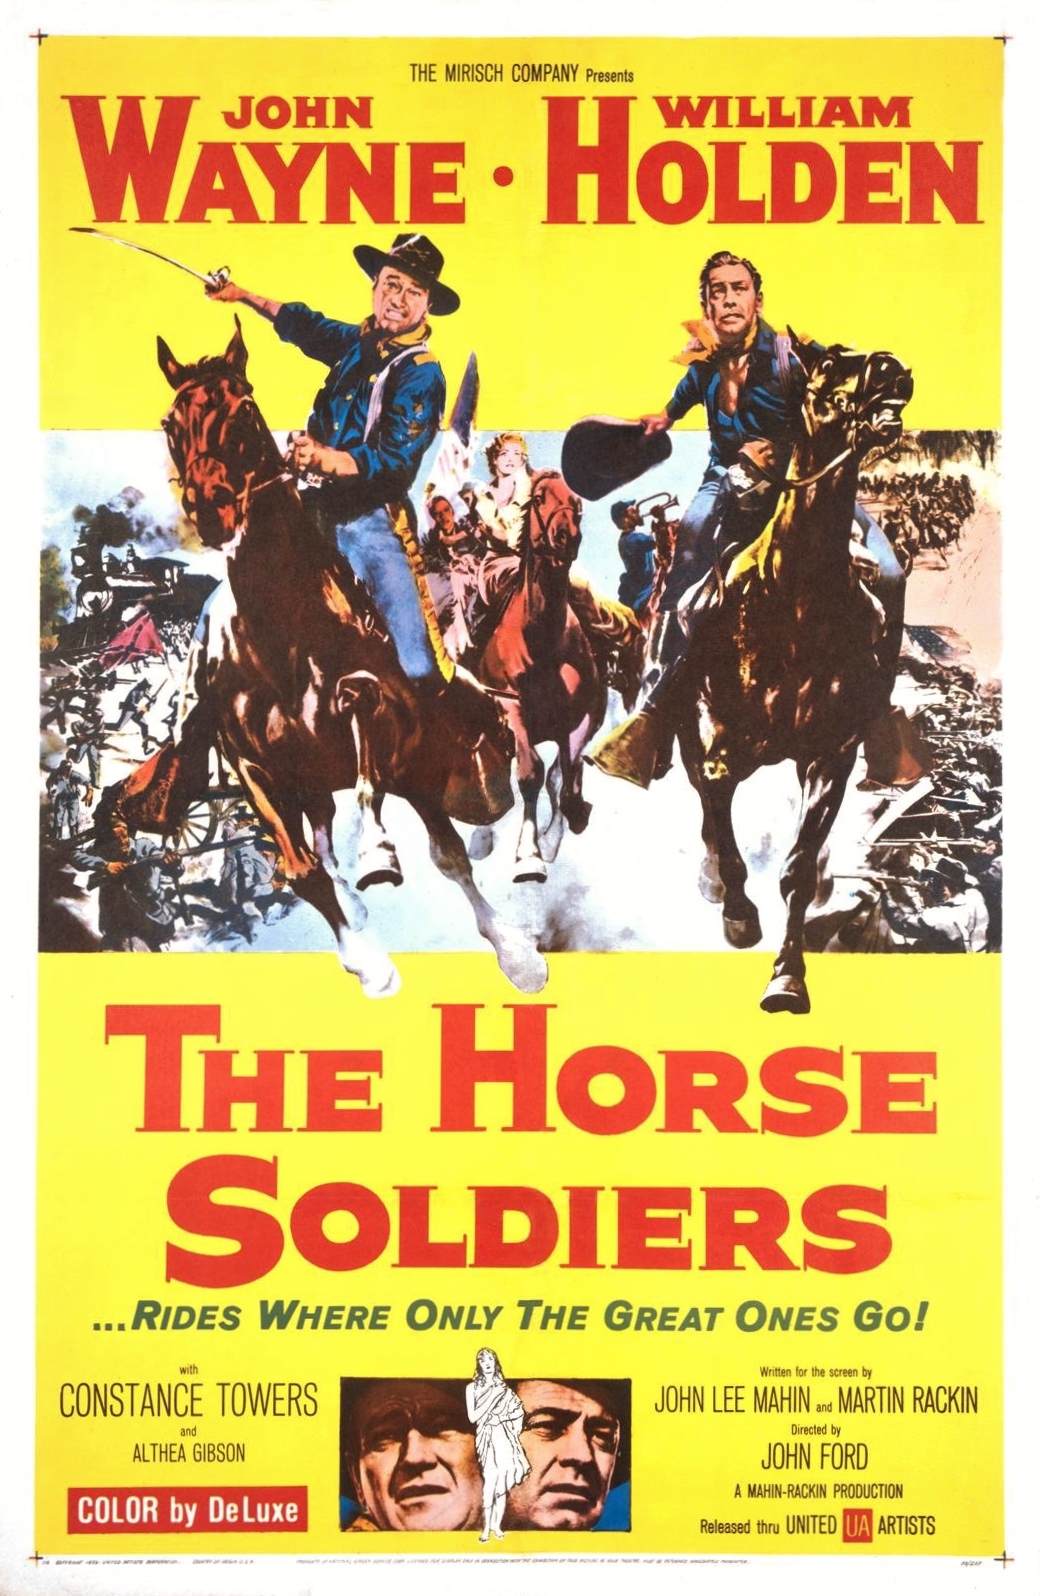 Advertisement poster-The Horse Soldiers